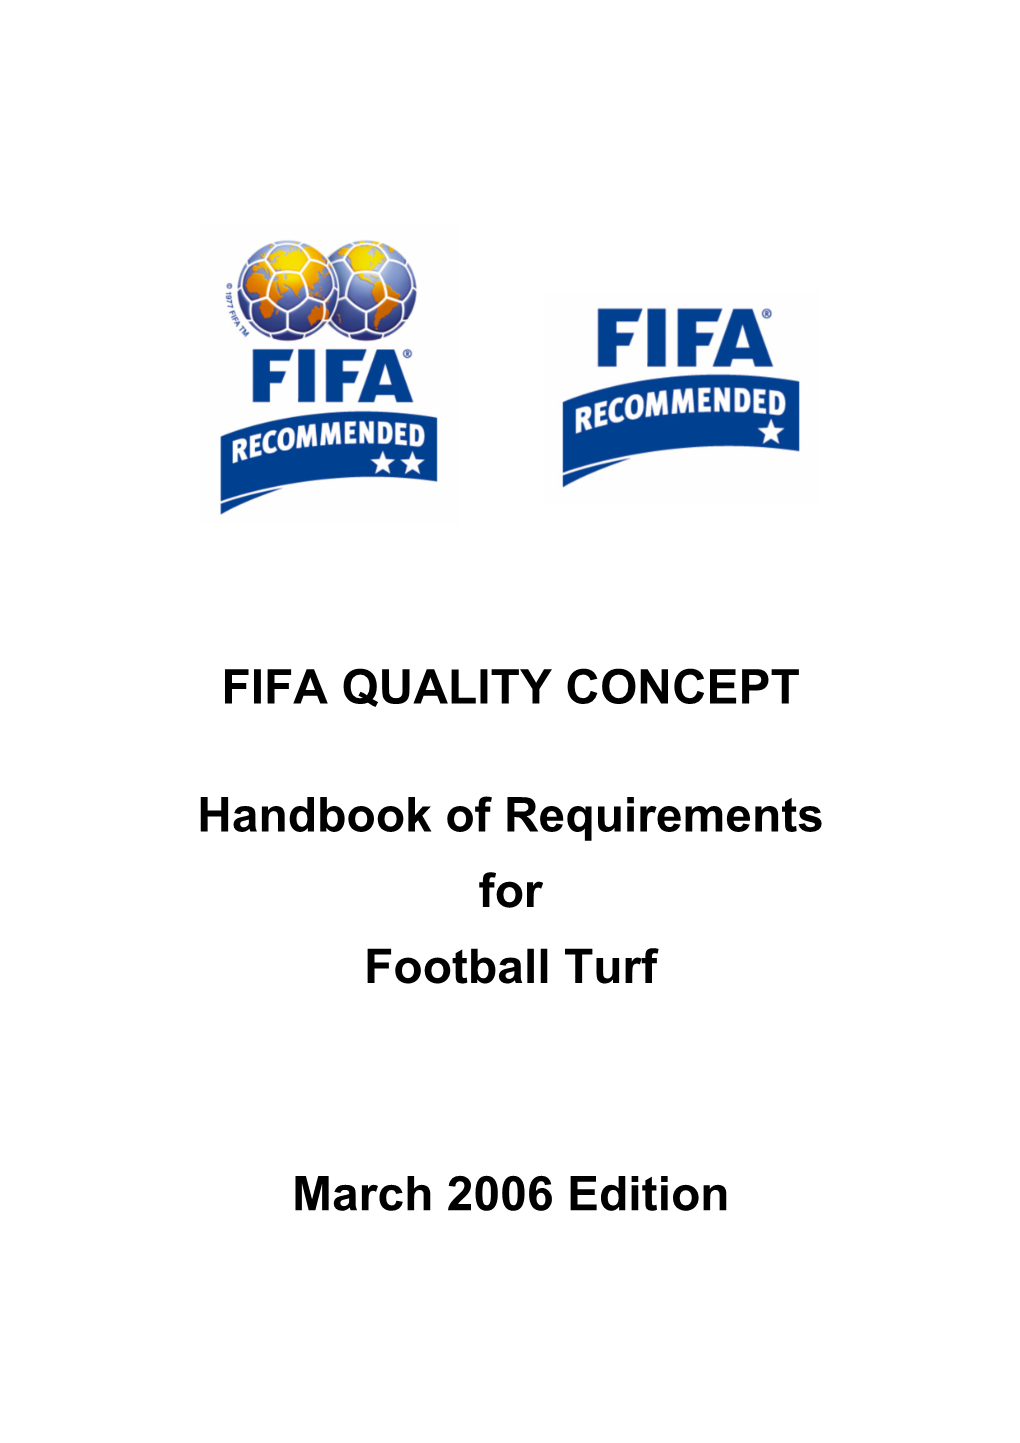 FIFA QUALITY CONCEPT Handbook of Requirements for Football Turf